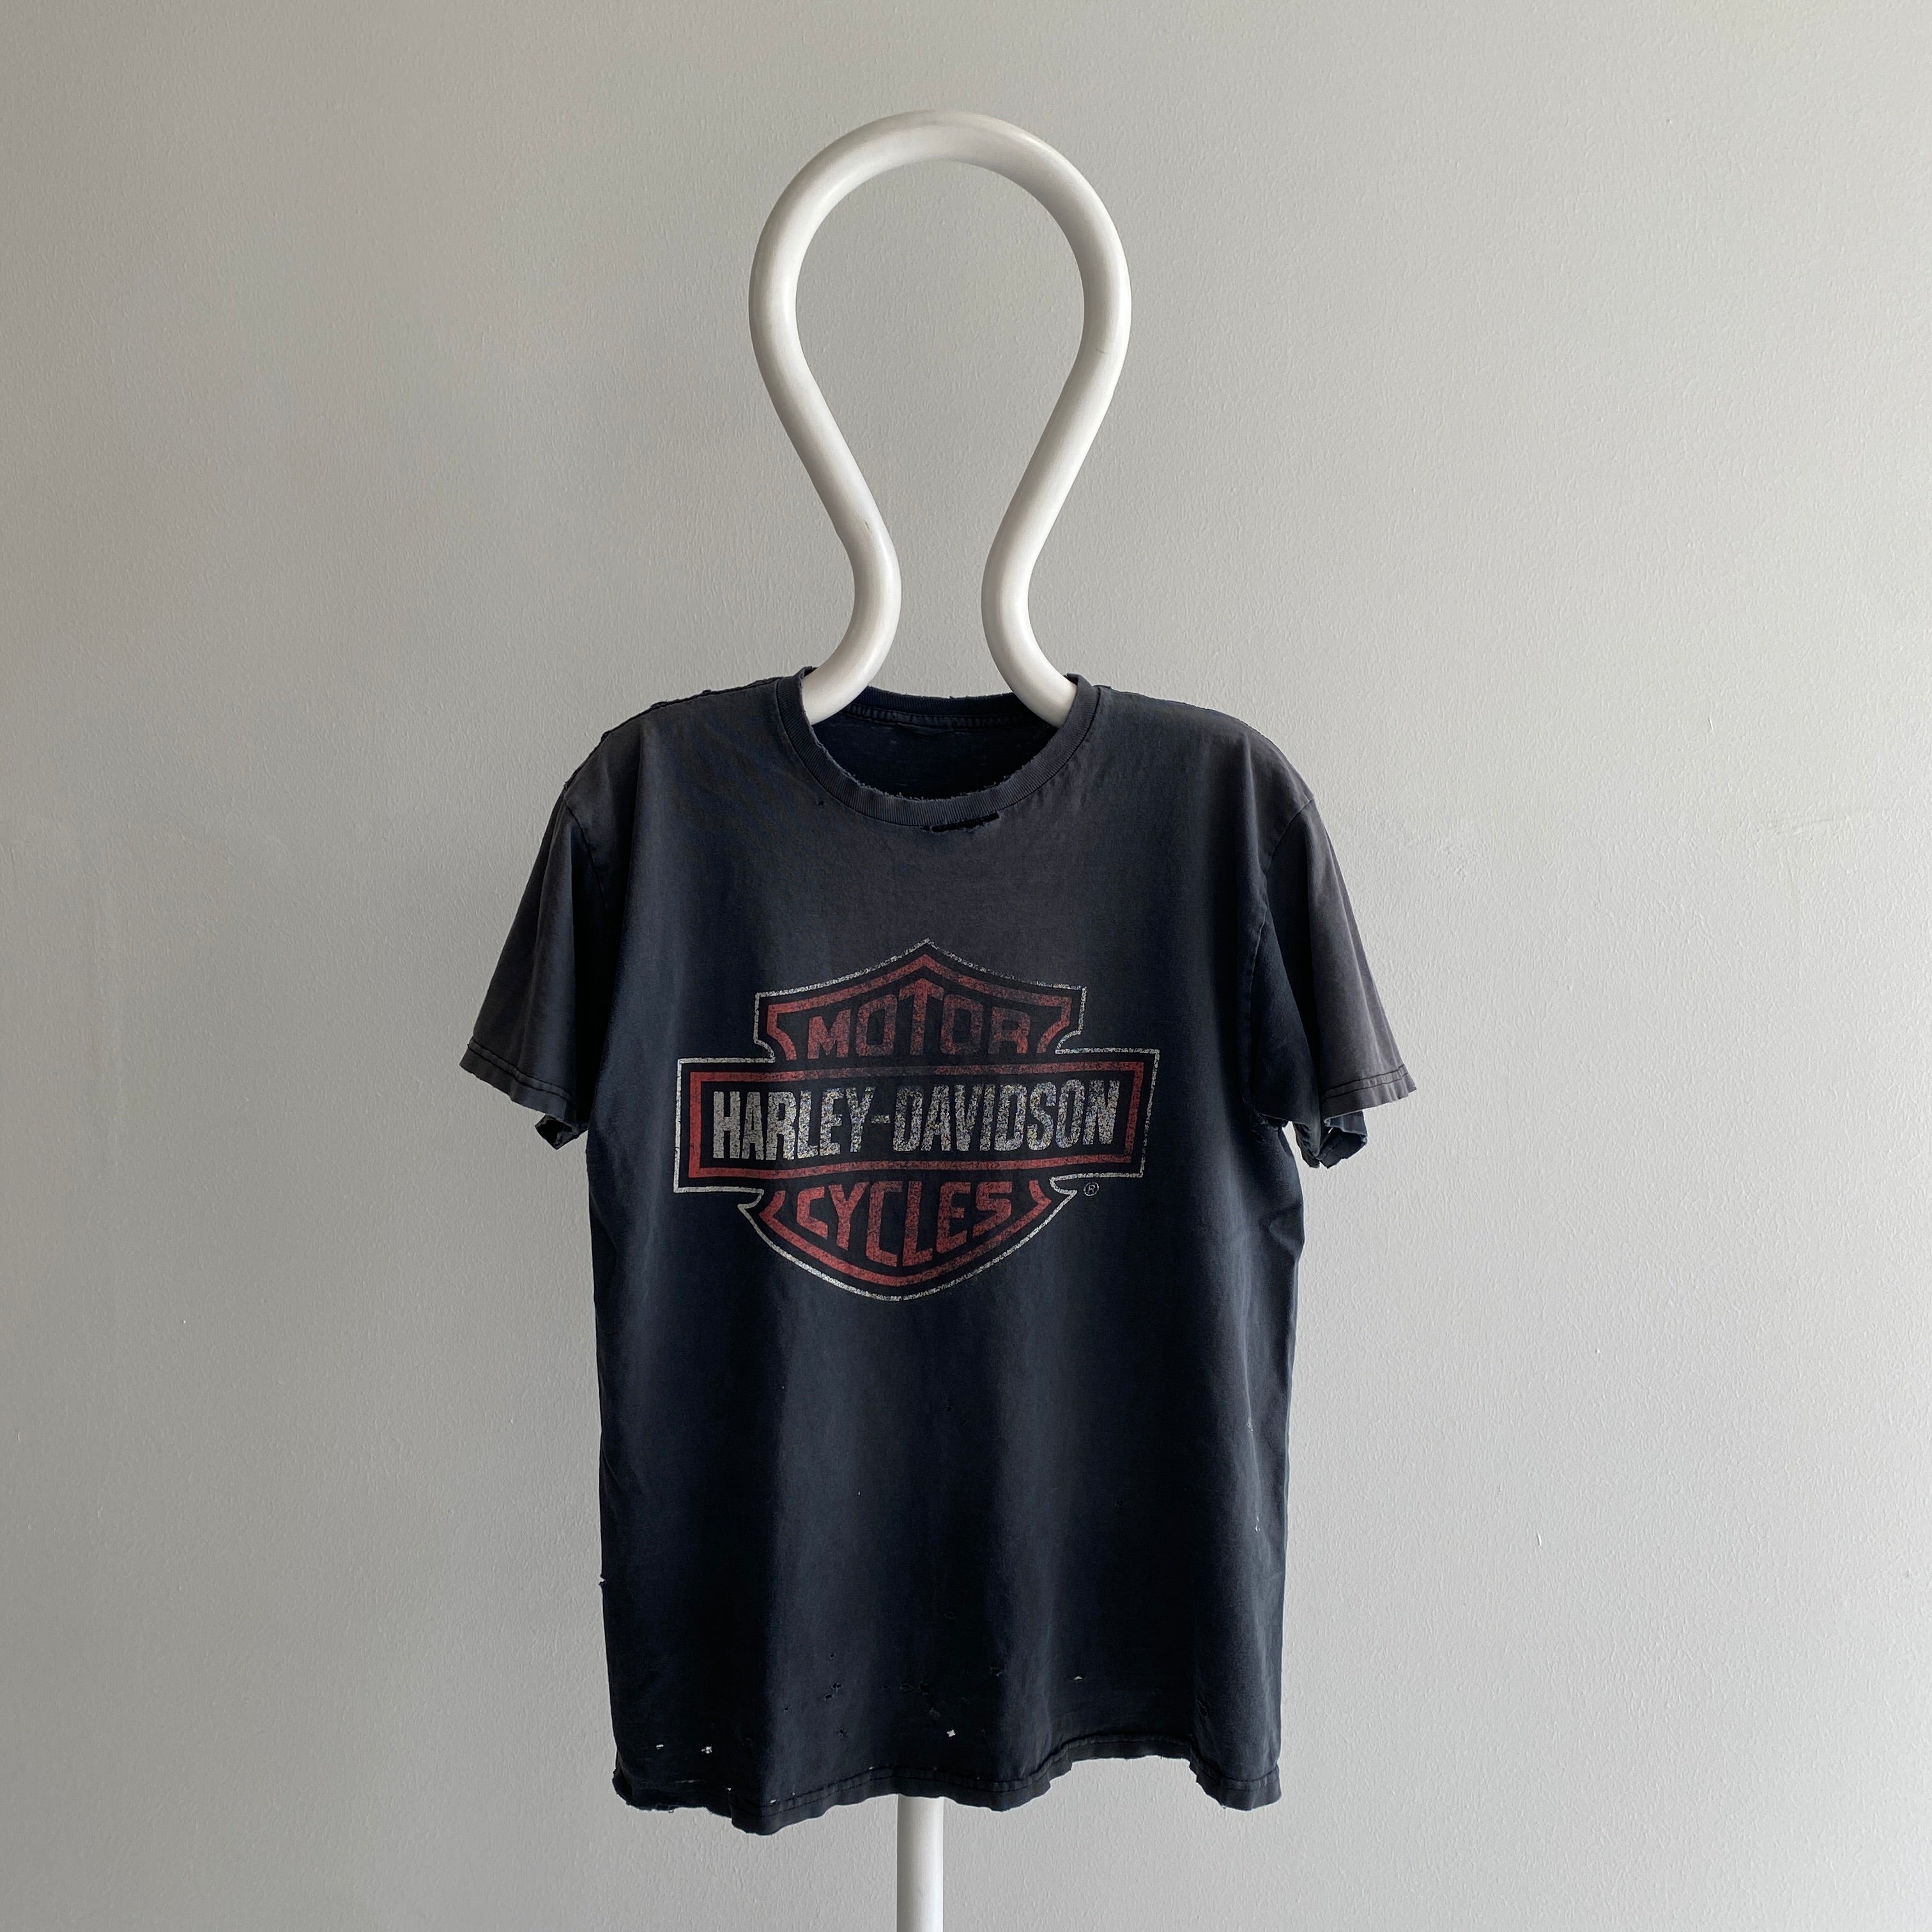 2000s Tattered, Torn, Faded, Worn - All The Things - Harley T-Shirt